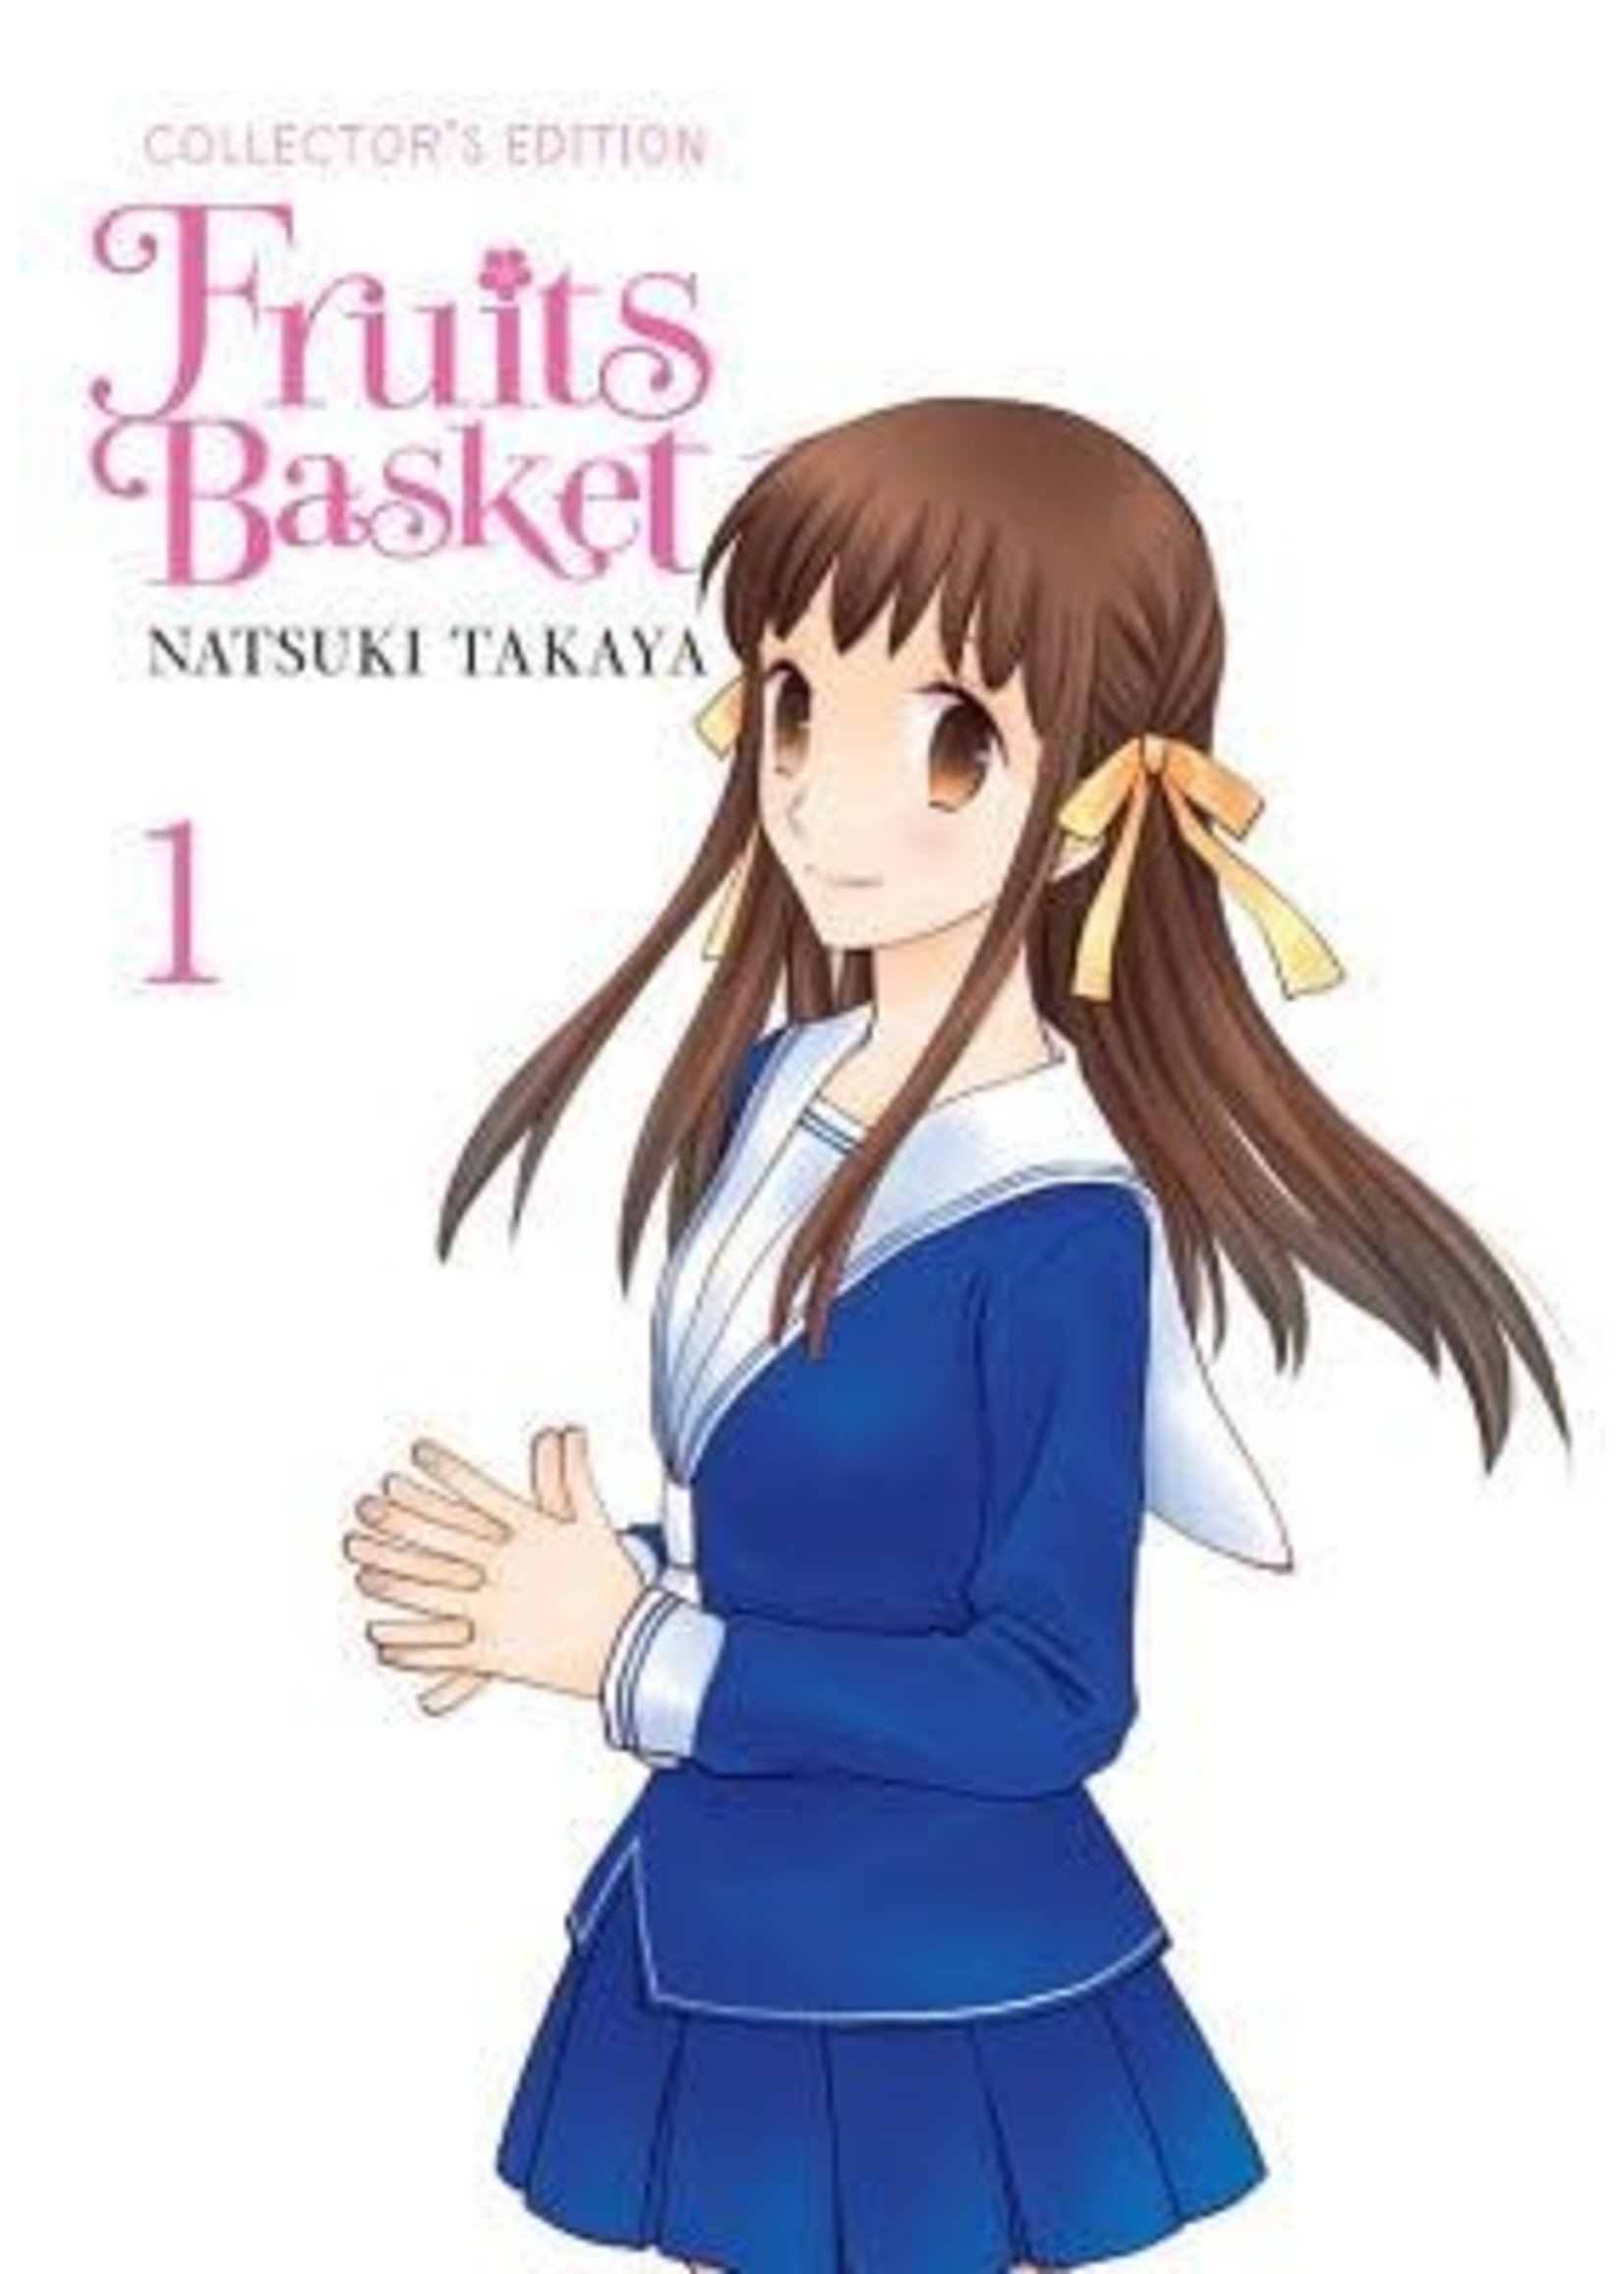 Fruits Basket Collector's Edition, Vol. 1 (Fruits Basket Collector's Edition #1) by Natsuki Takaya